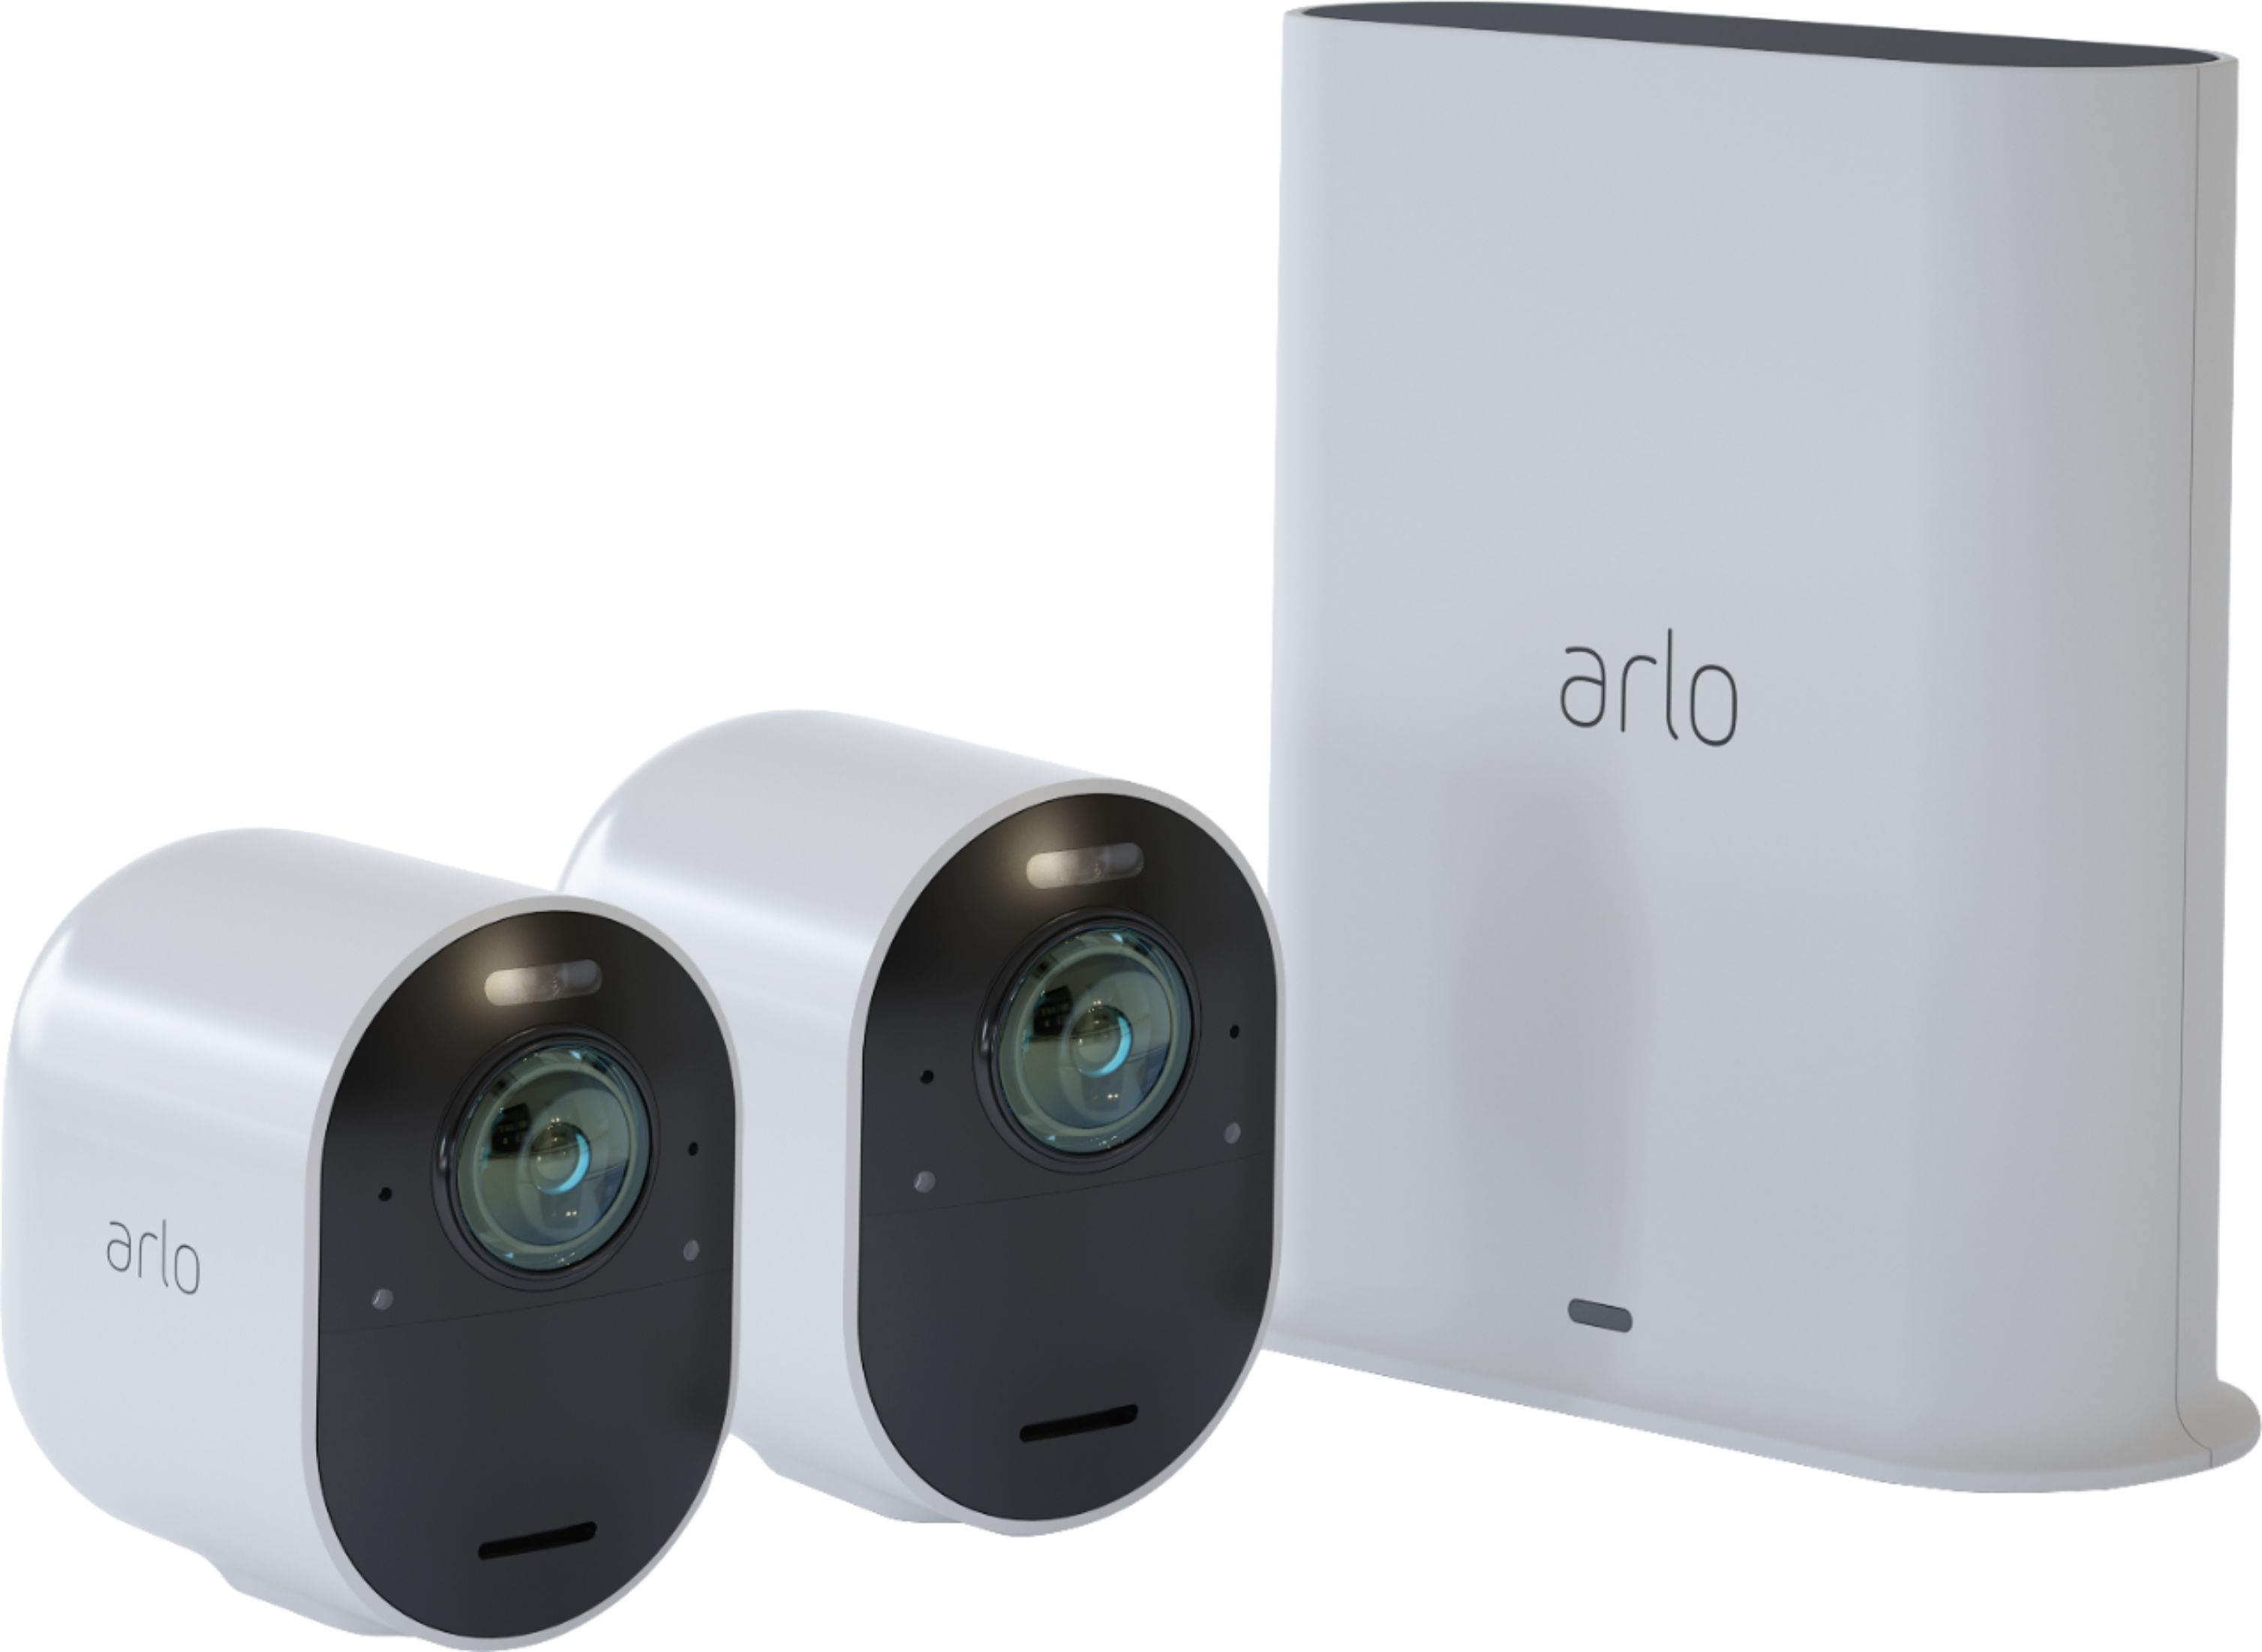 arlo camera distance from base